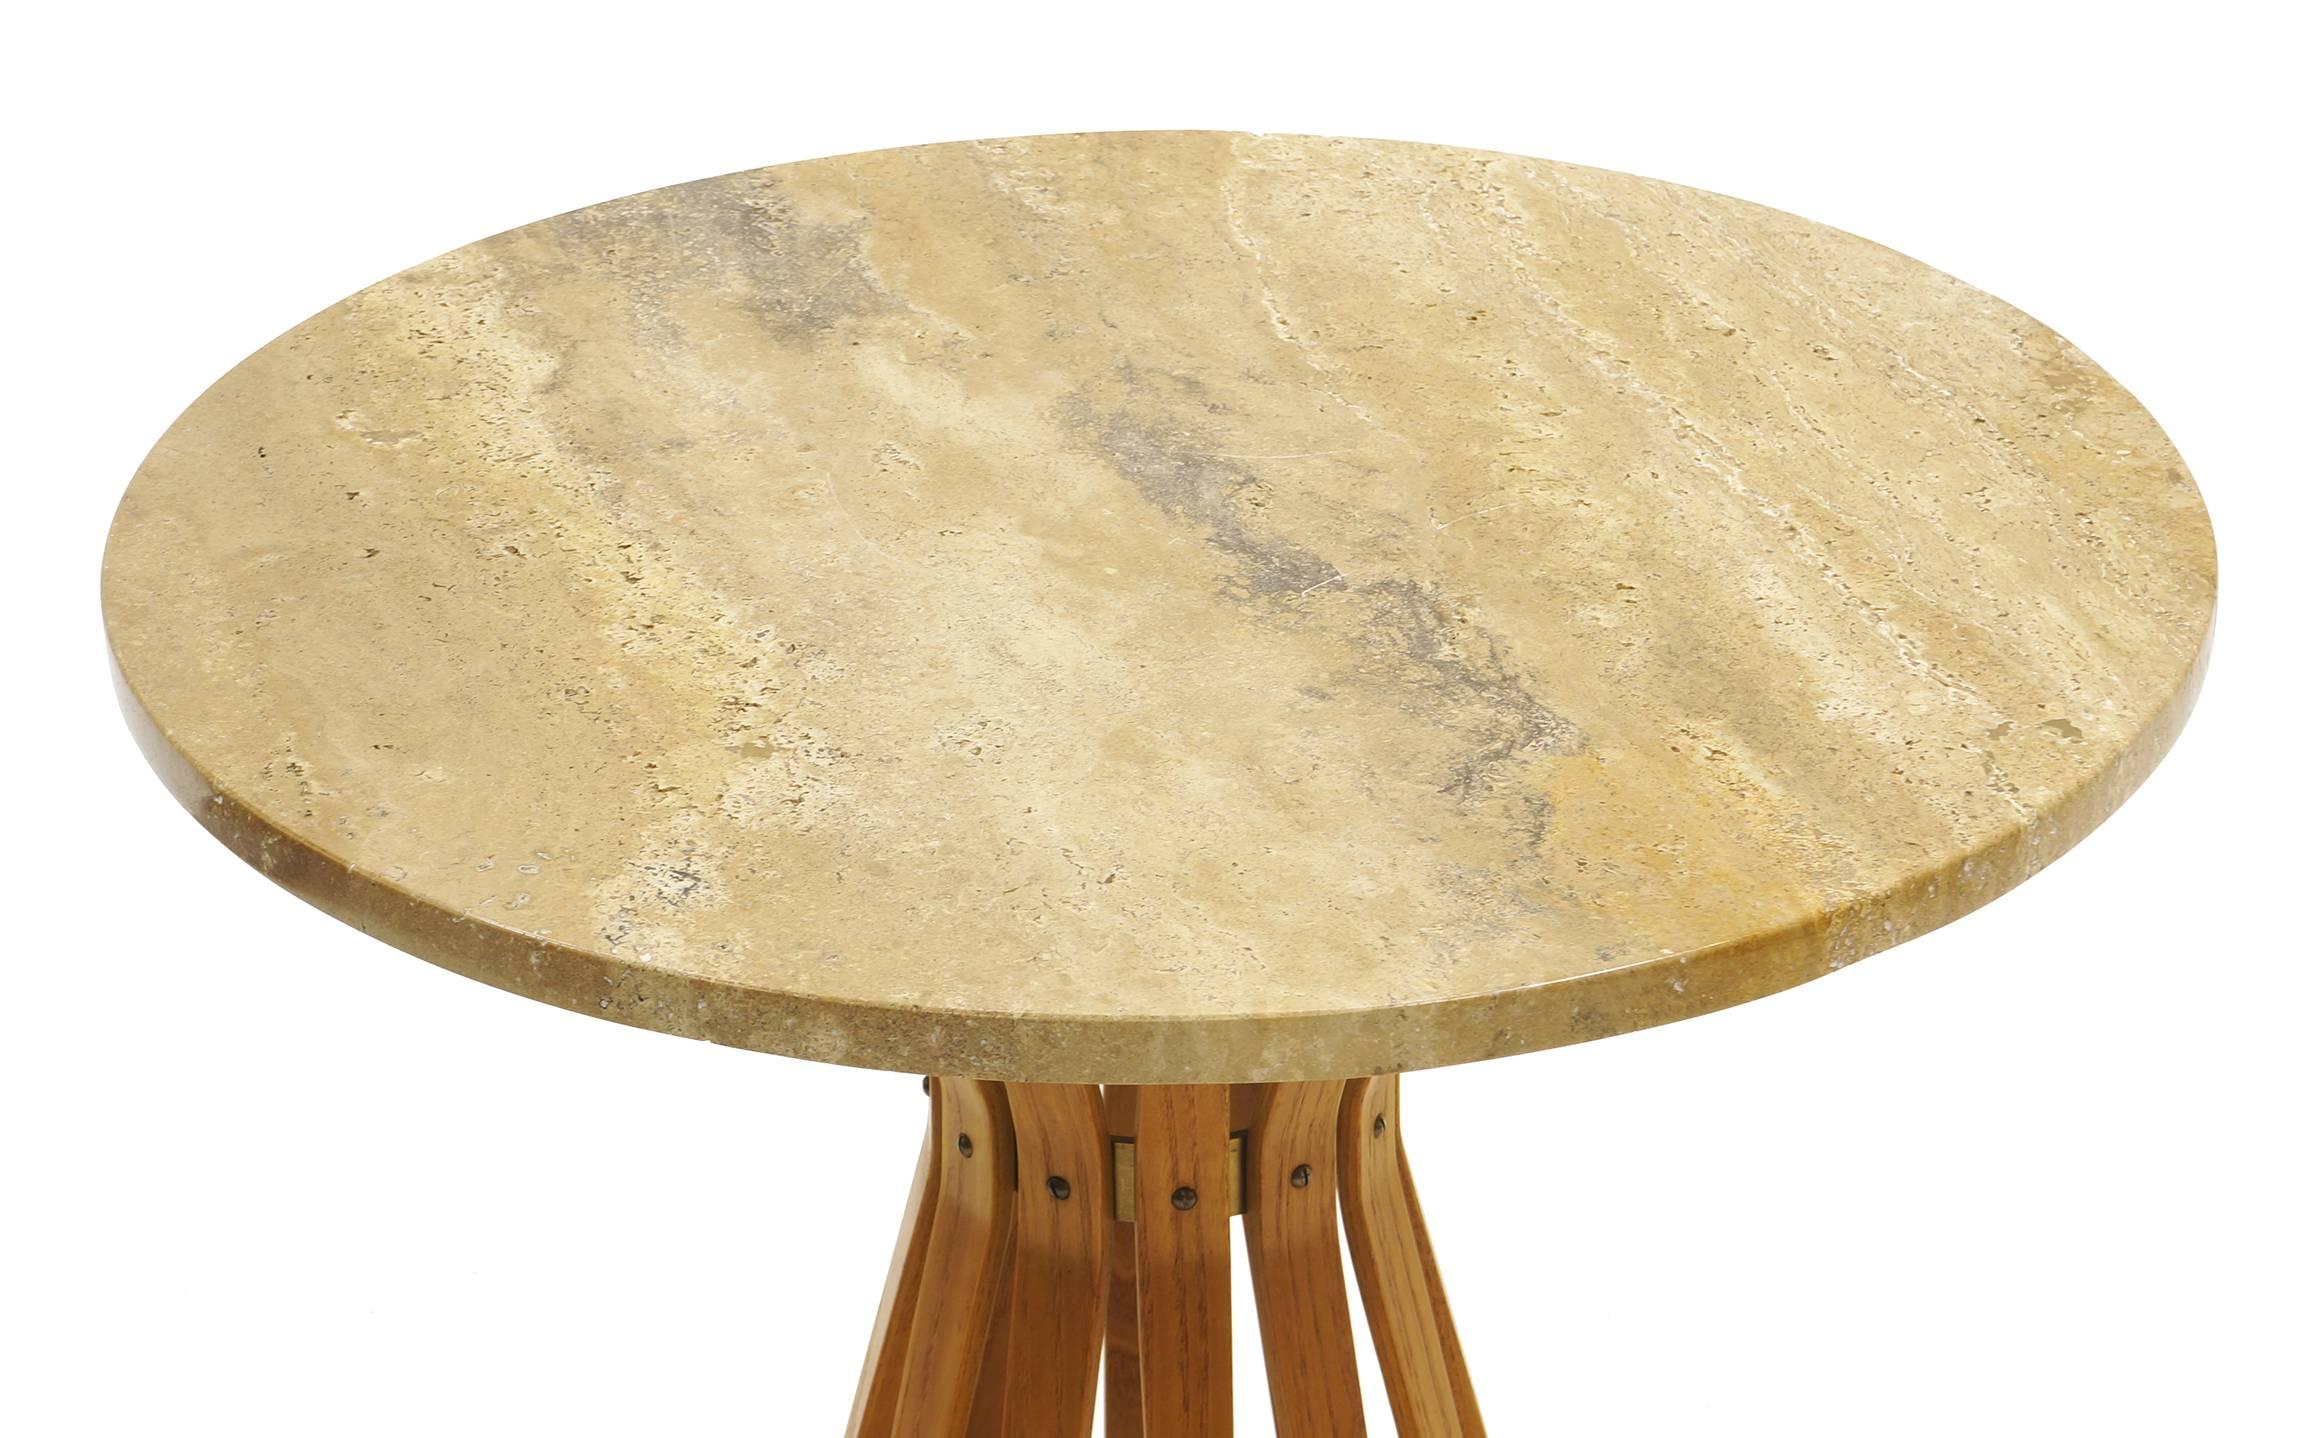 Mid-Century Modern Large Sheaf of Wheat Occasional Table Designed by Edward Wormley for Dunbar